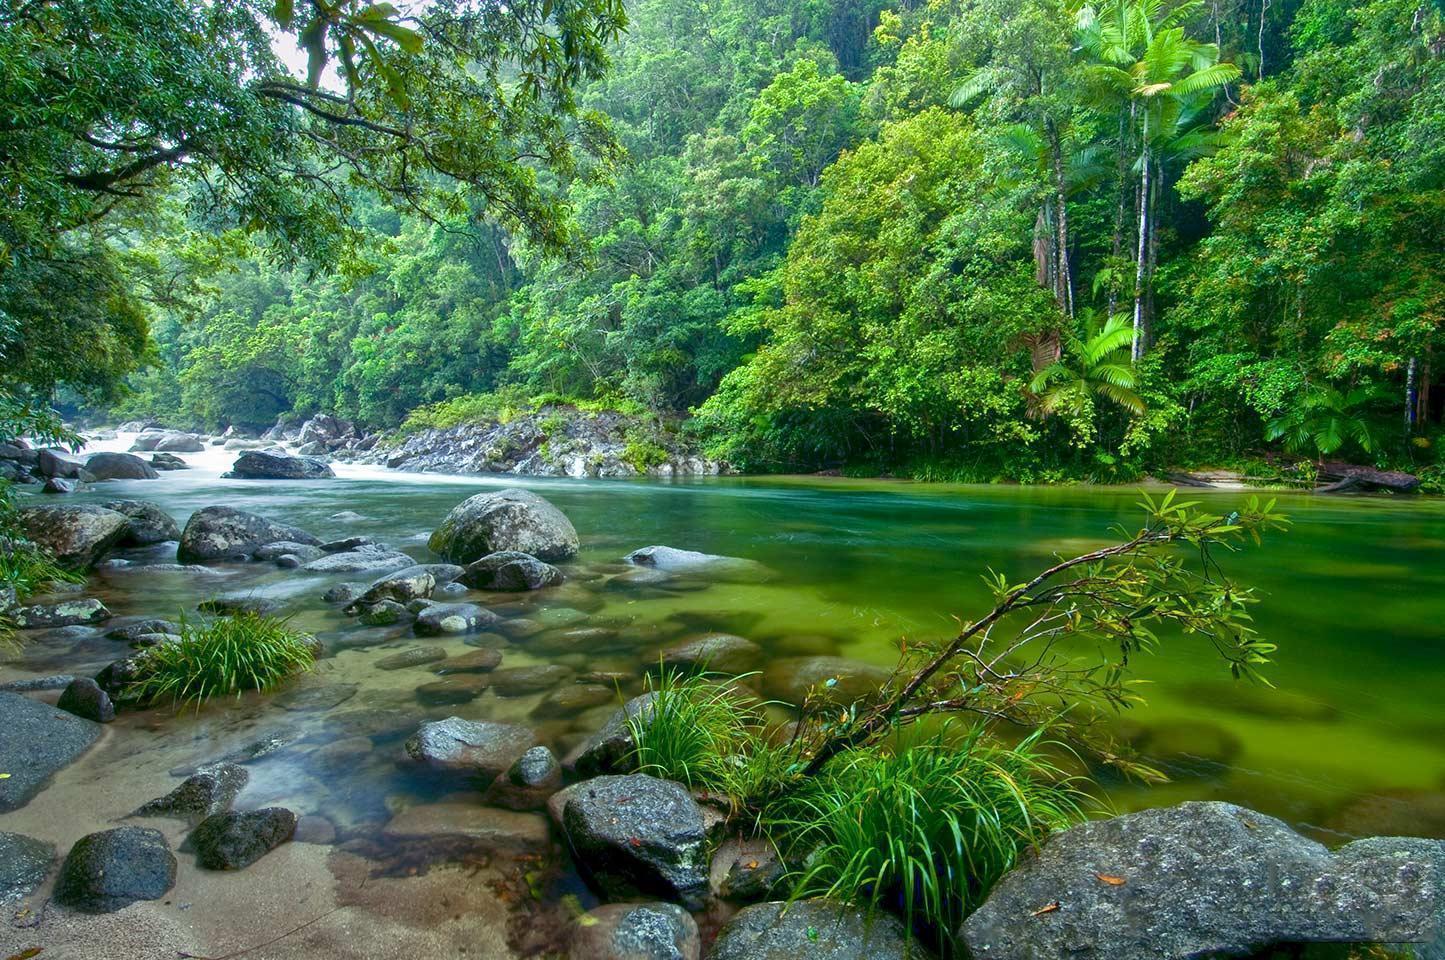 10 Rare Animals & Plants To Spot In The Daintree Rainforest